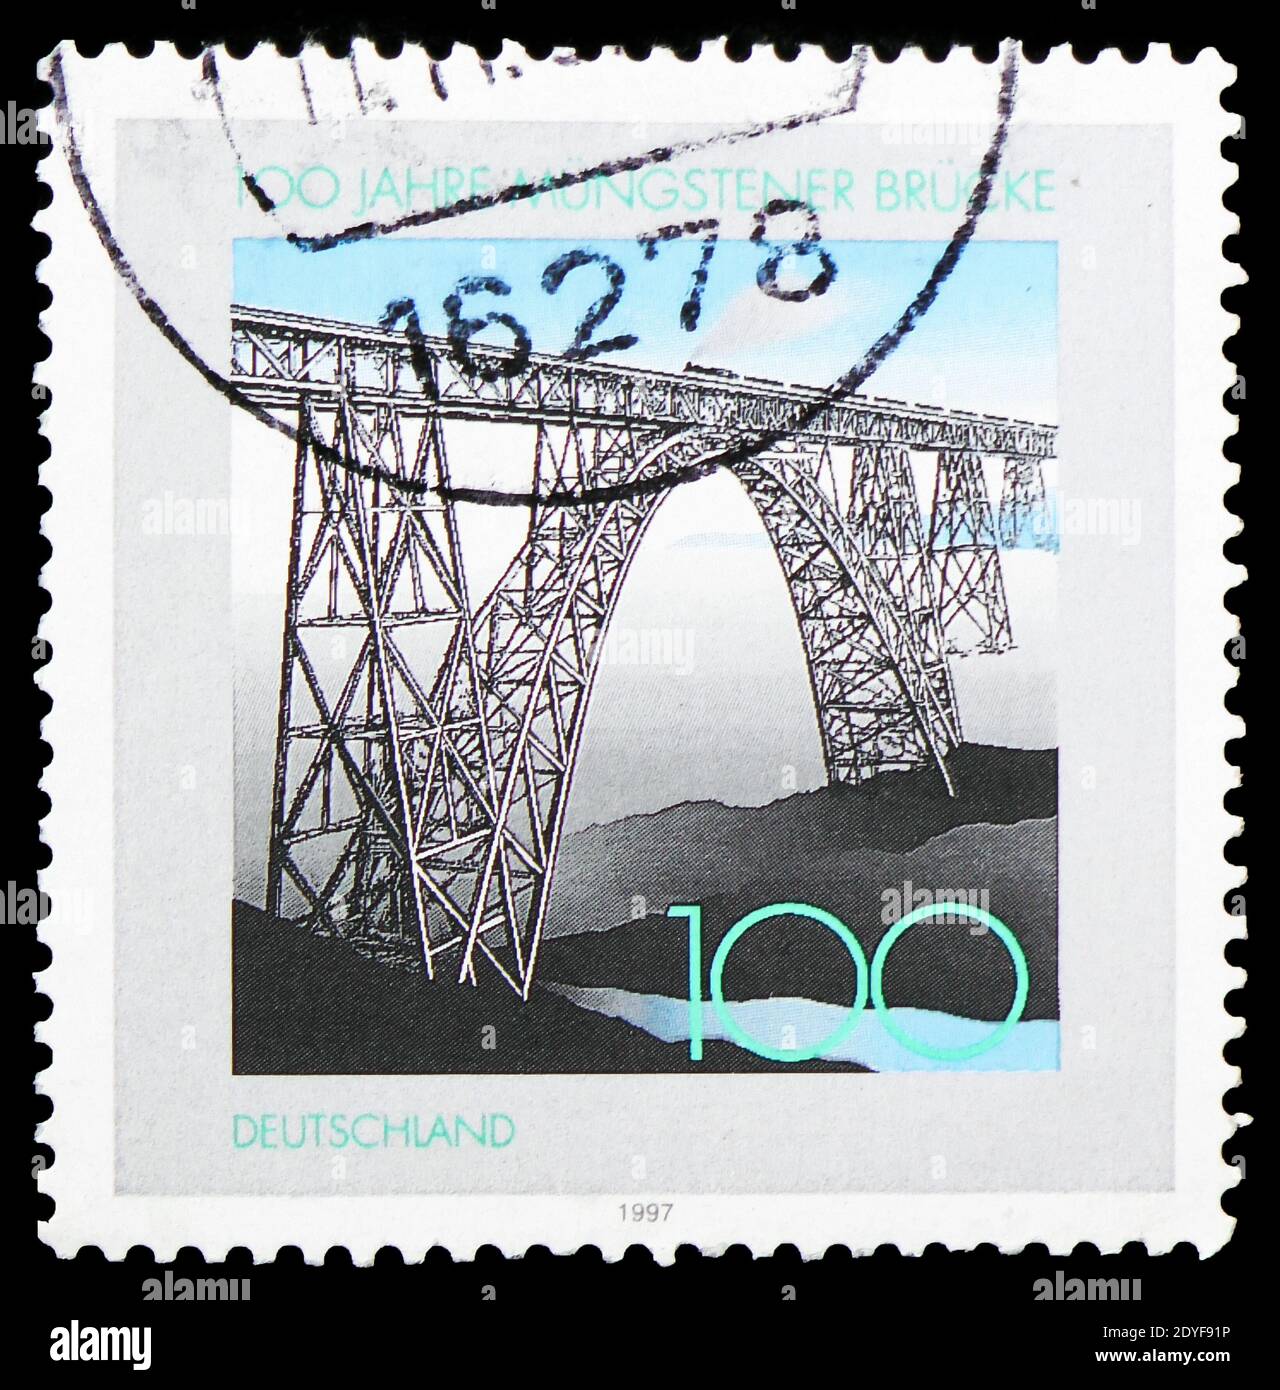 MOSCOW, RUSSIA - FEBRUARY 22, 2019: A stamp printed in Germany, Federal Republic shows Mungsten Bridge, Centenary, Bridges serie, circa 1997 Stock Photo